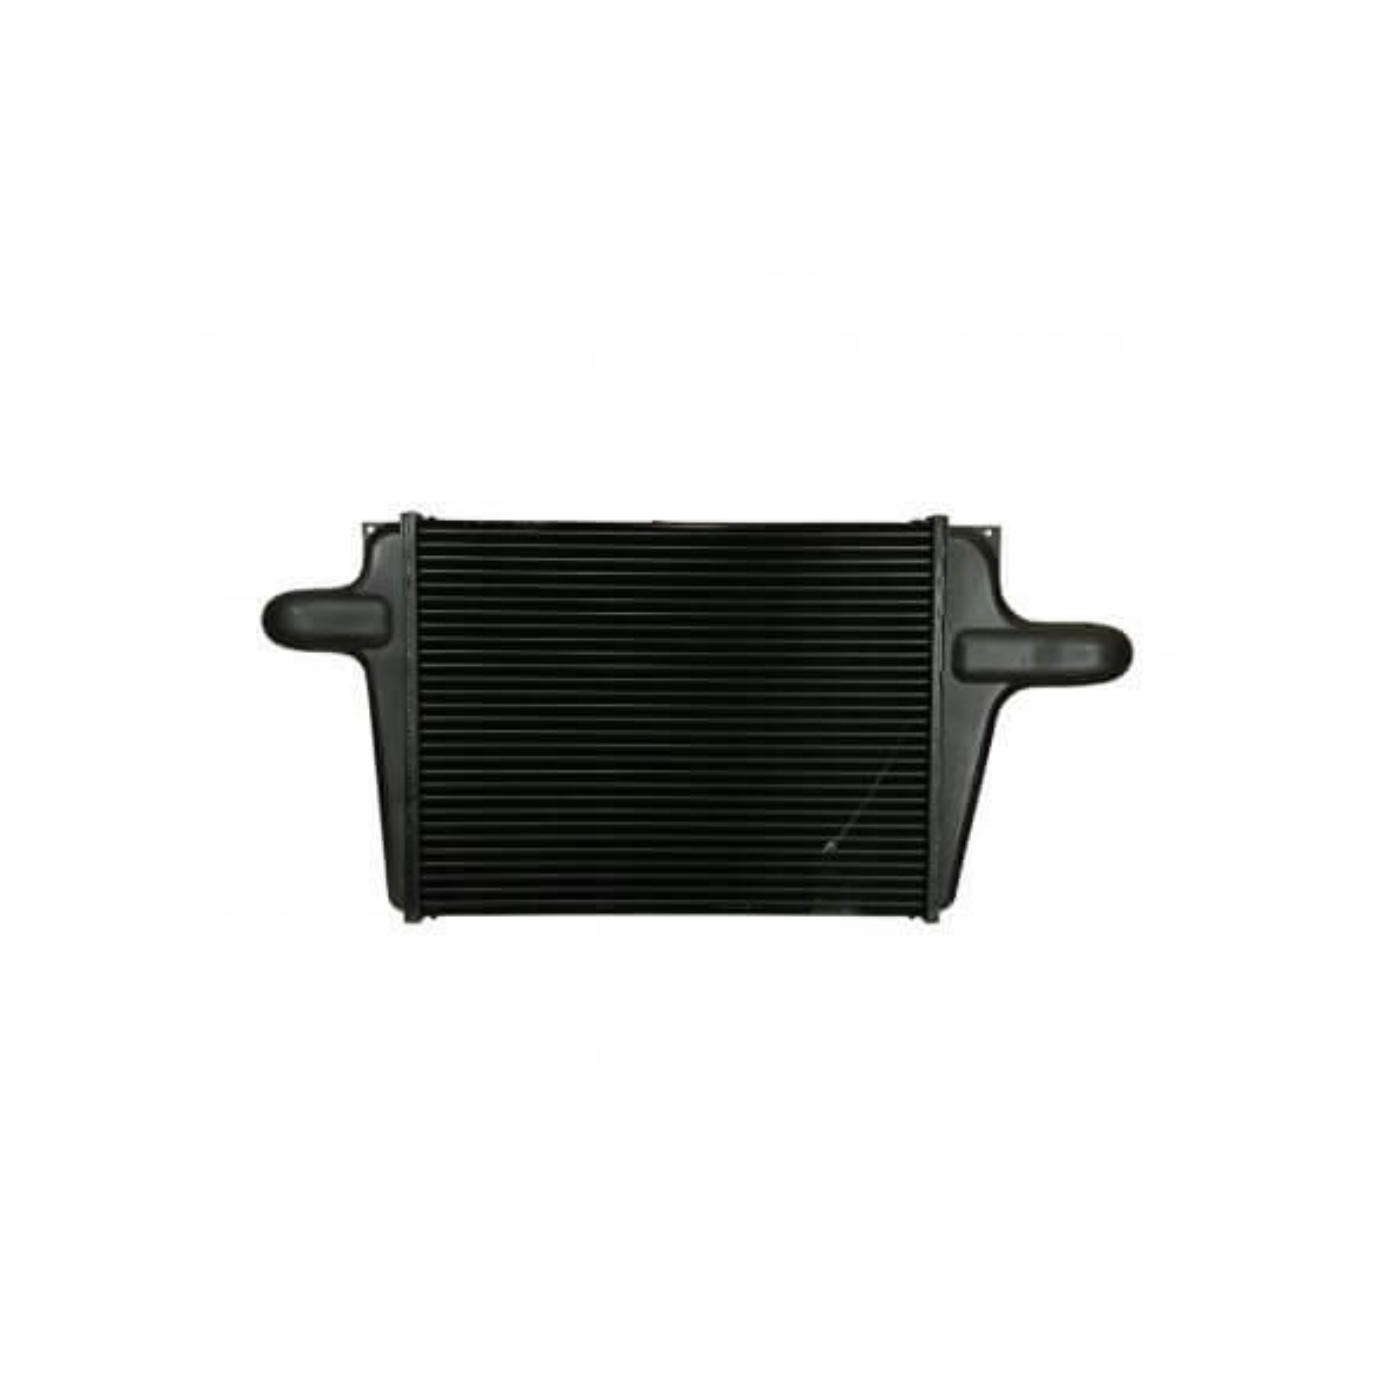 Chevygm 650 From Top Of Tank To Center Of Neck Charge Air Cooler